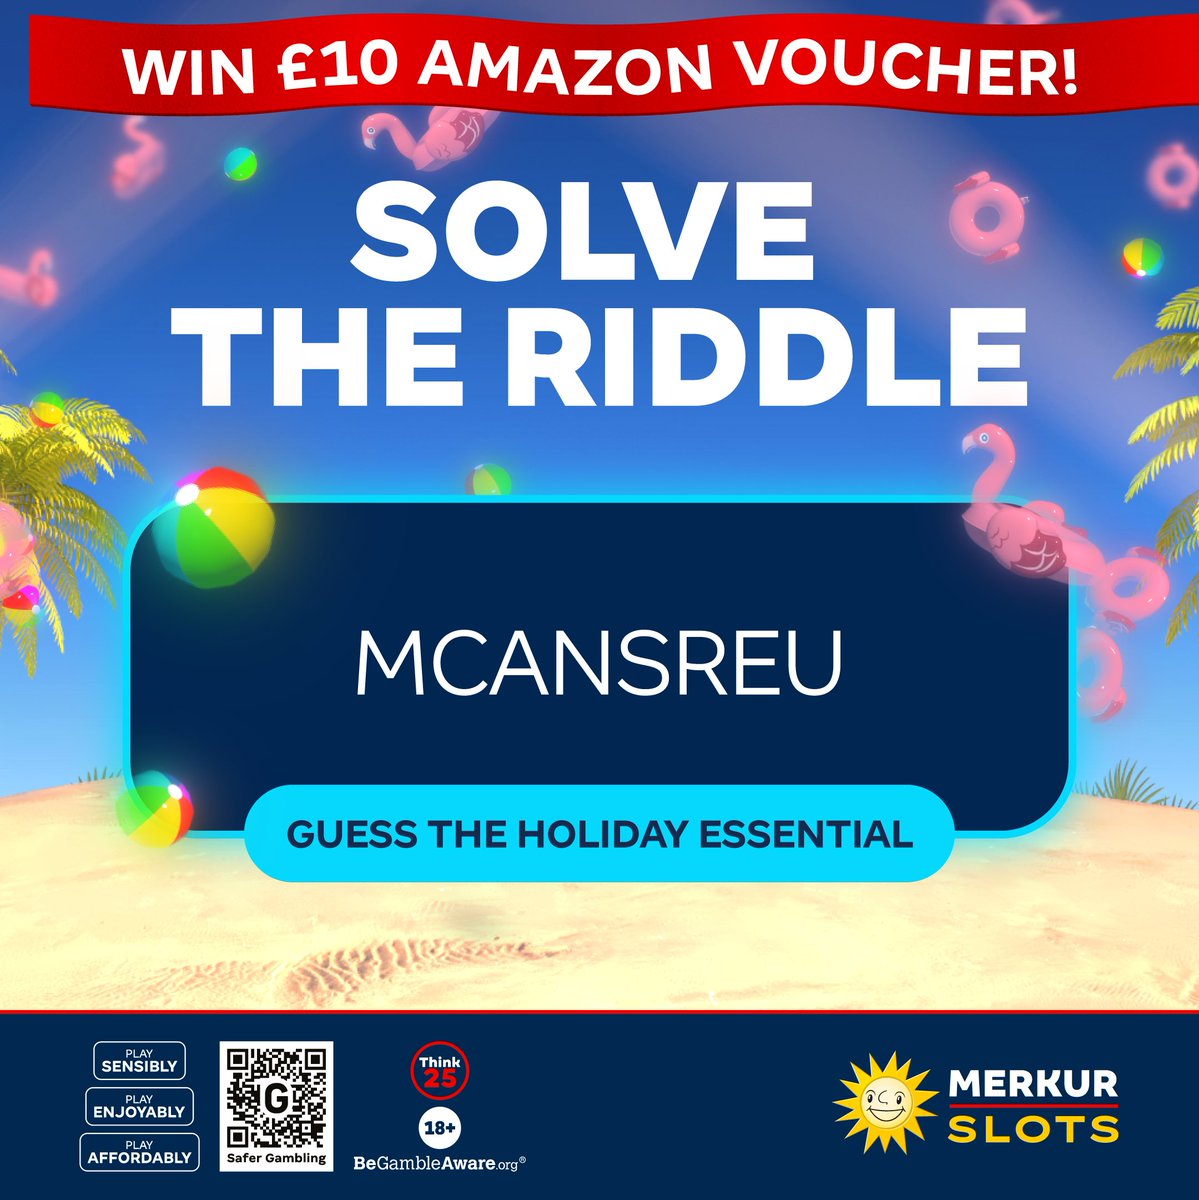 (18+, - BeGambleAware.org)
Can you decode this holiday essential? ✨ Solve the scramble and you could be bagging a £10 AMAZON VOUCHER! 😍🛍️
Drop your guess on our Facebook page! Entries close next Thursday. 

Full T&C's on Facebook.

#Competition #WinitWednesday